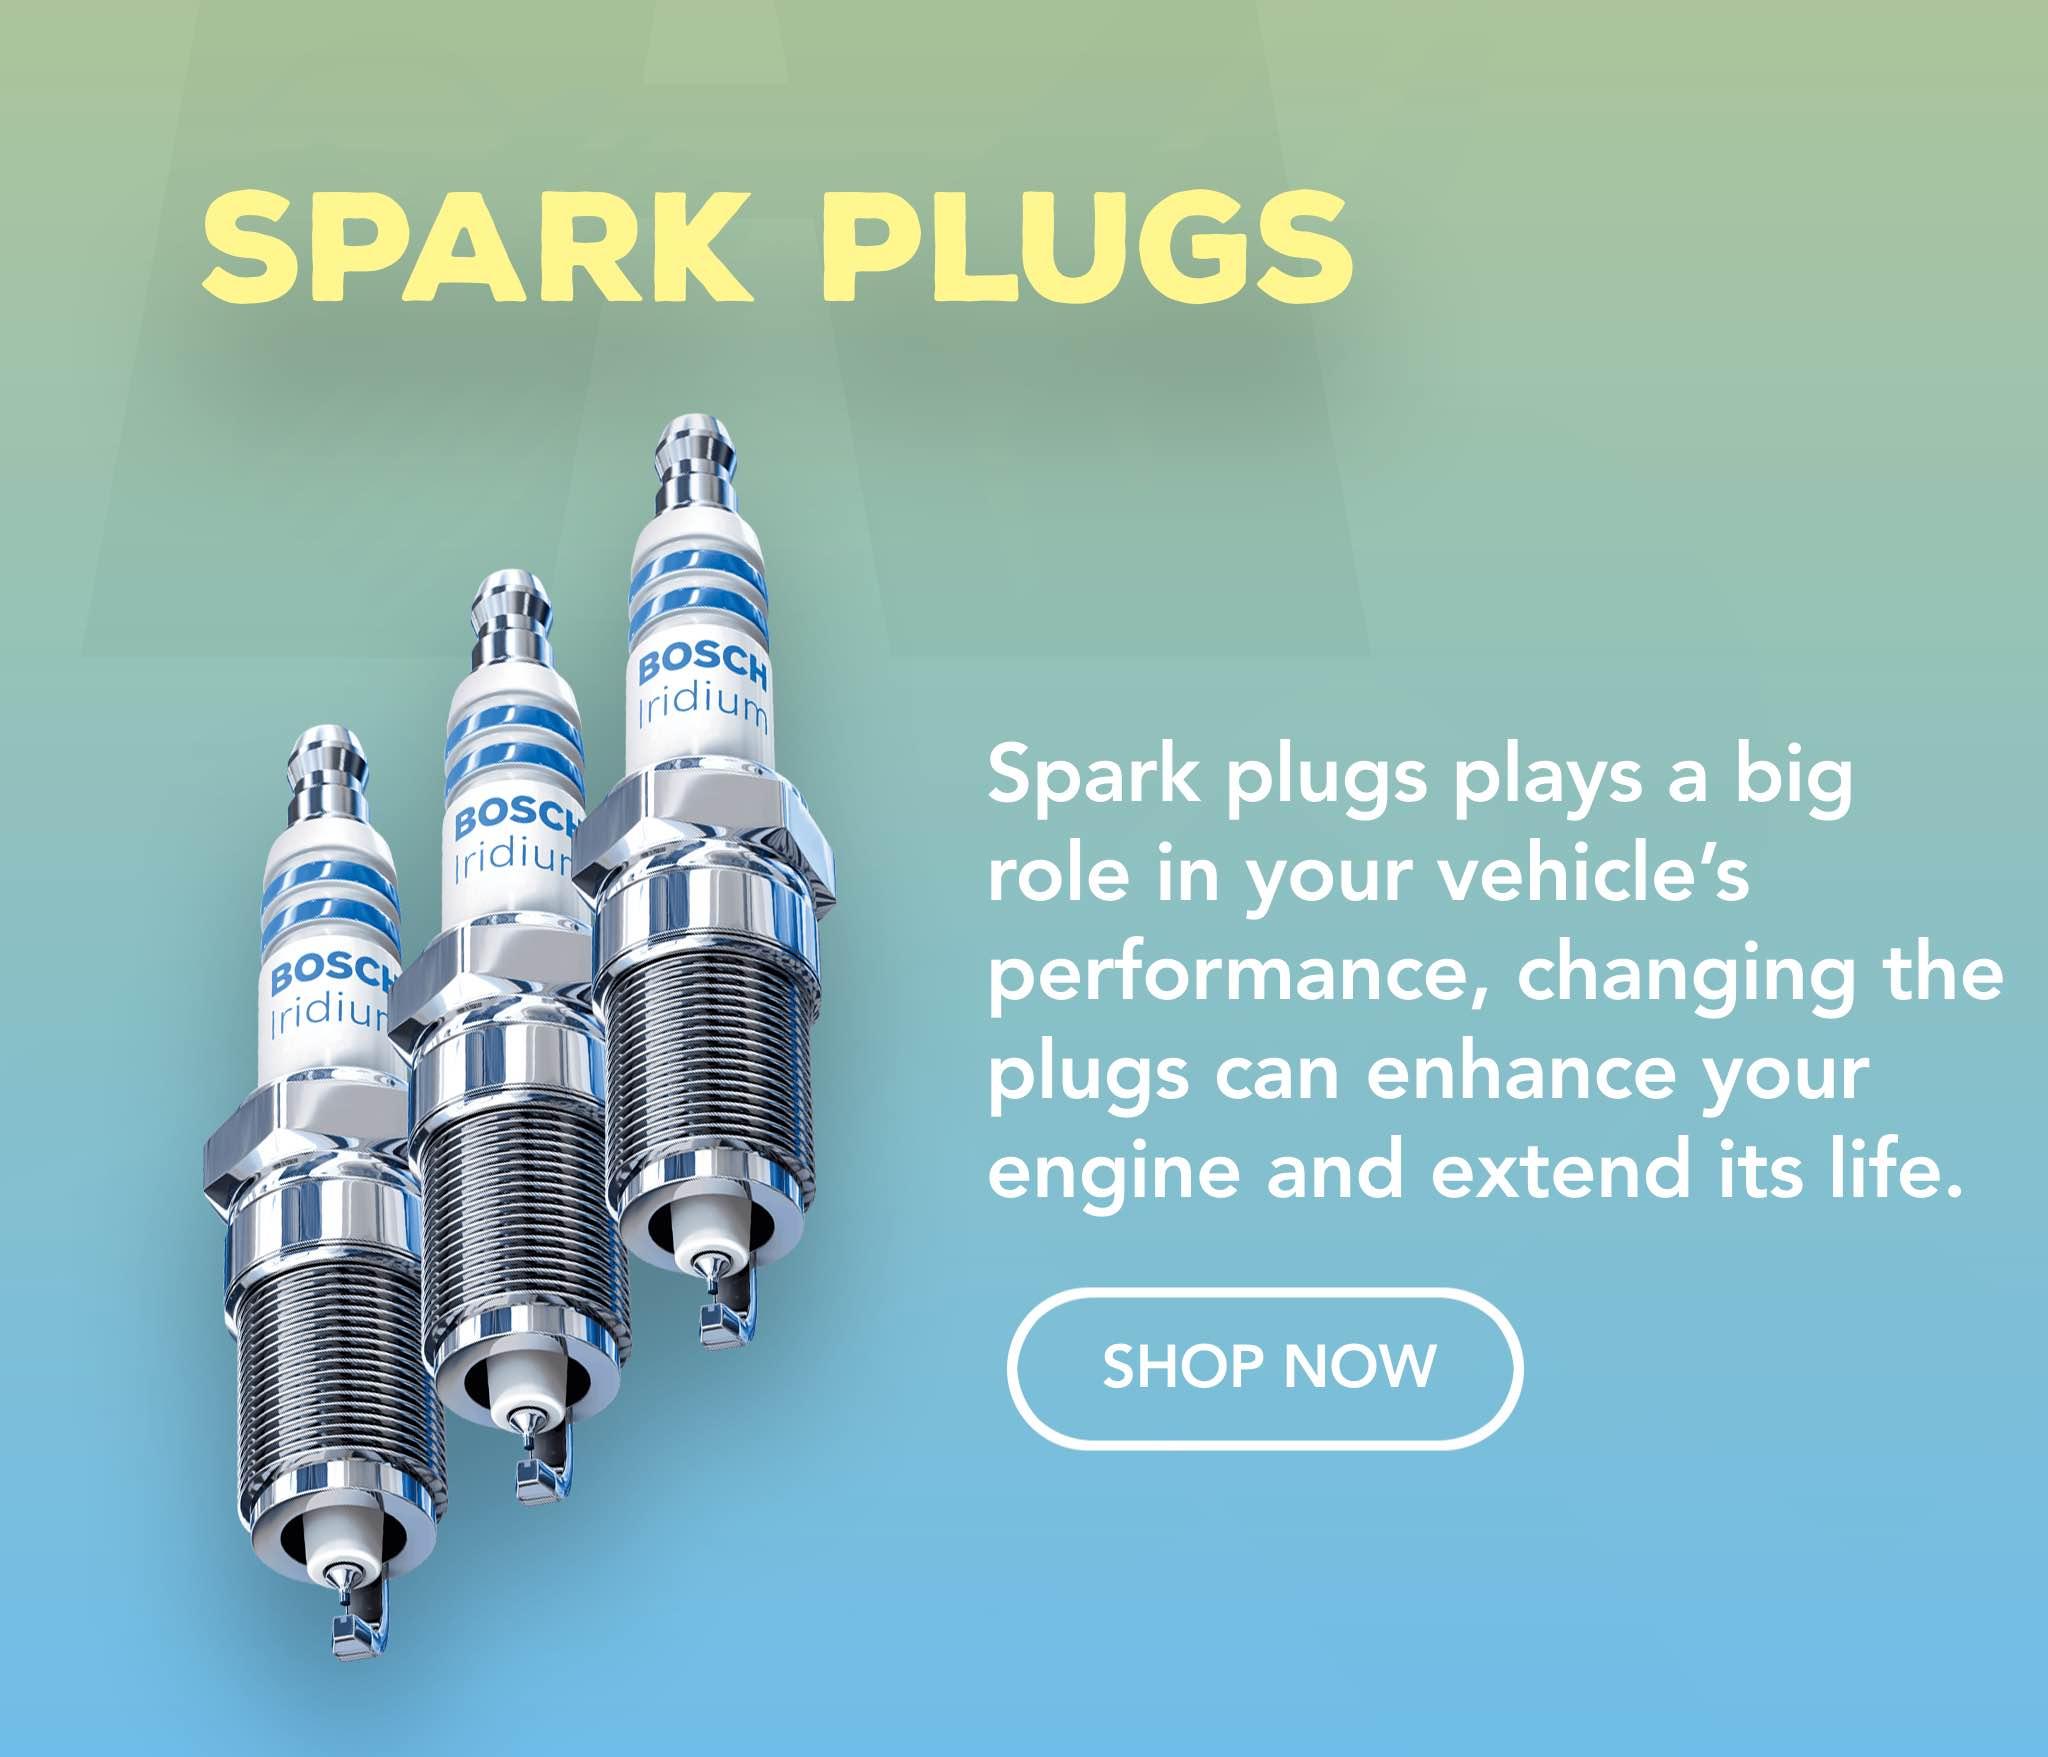 Spark plugs plays a big role in your vehicle's performance, changing the plugs can enhance your engine and extend its life.